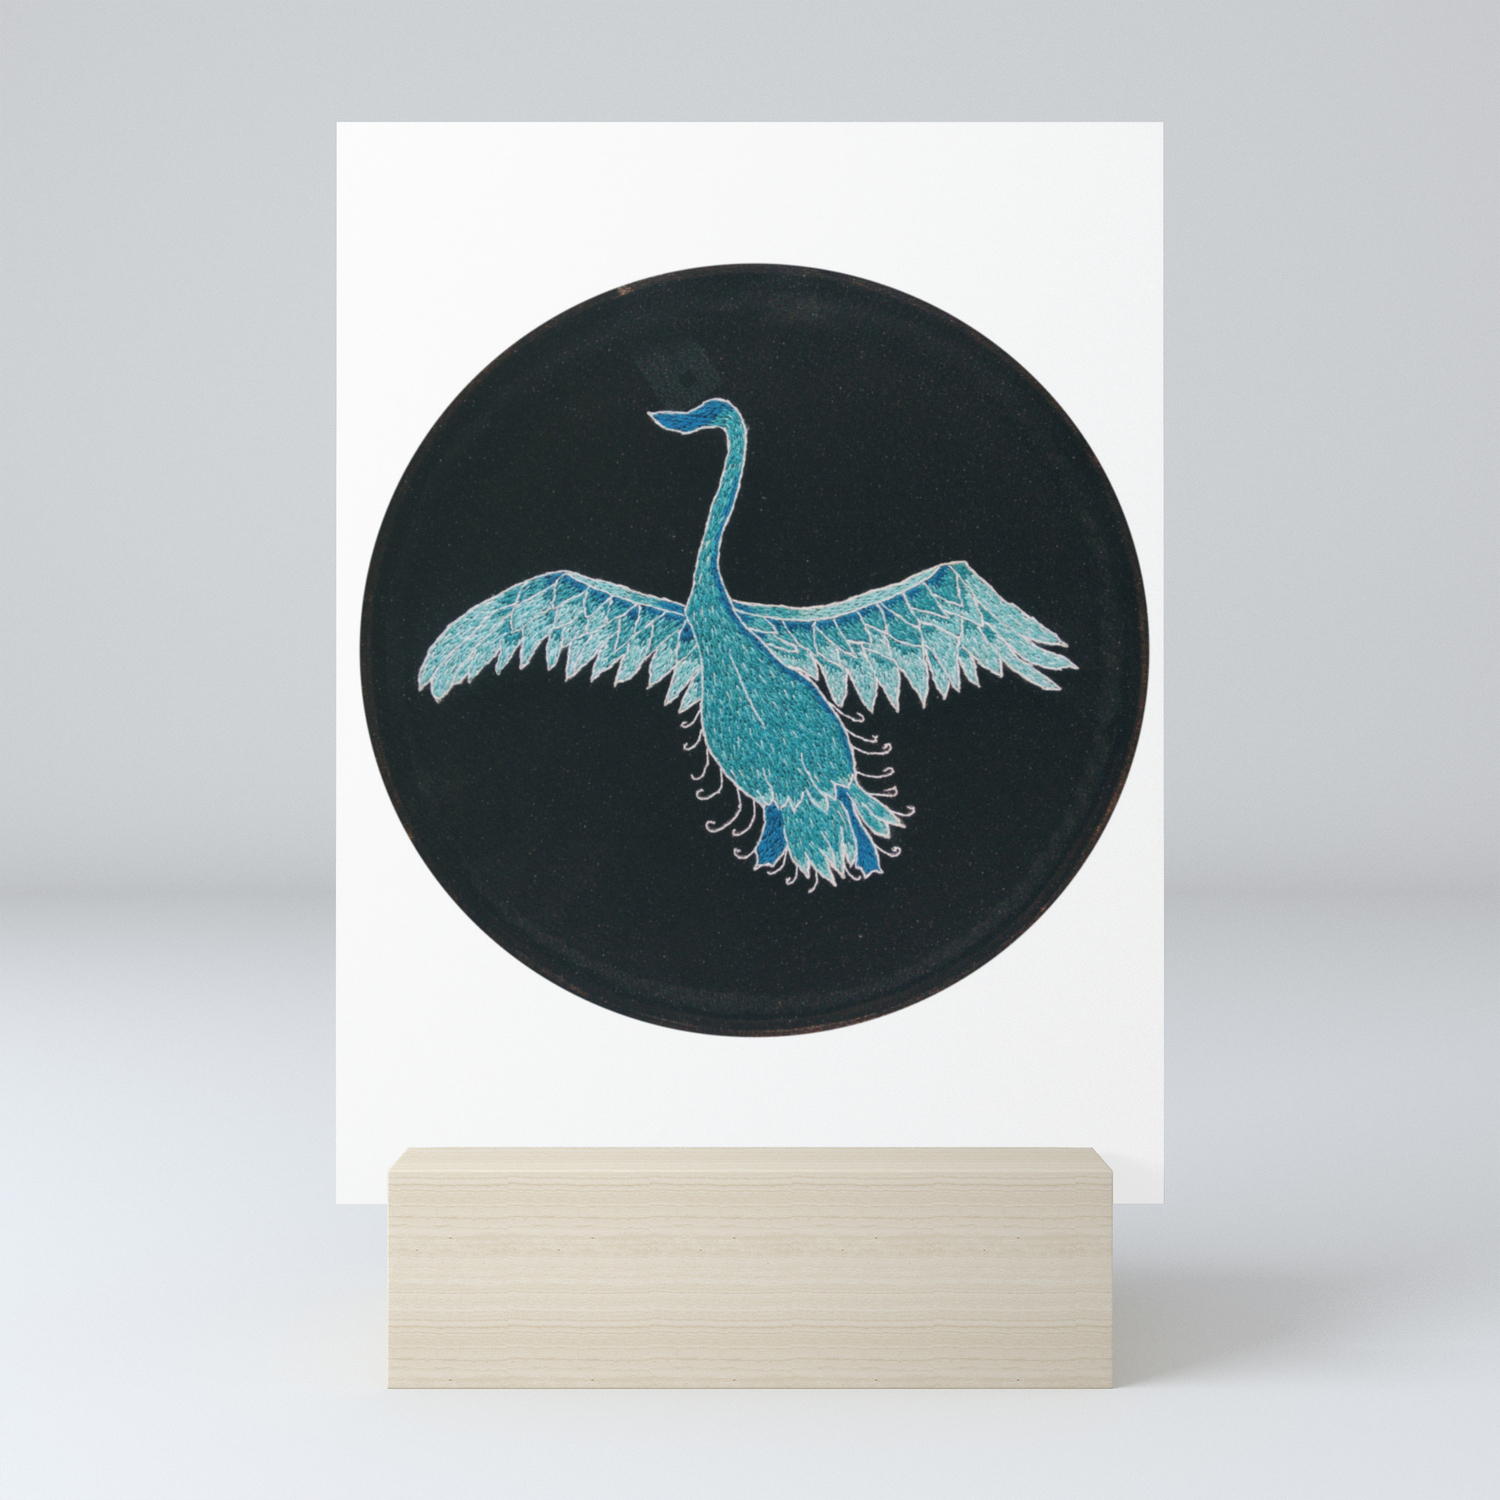 Observatory Implement Billy Black swan embroidered patronus Mini Art Print by Ed De La Rosa | Society6